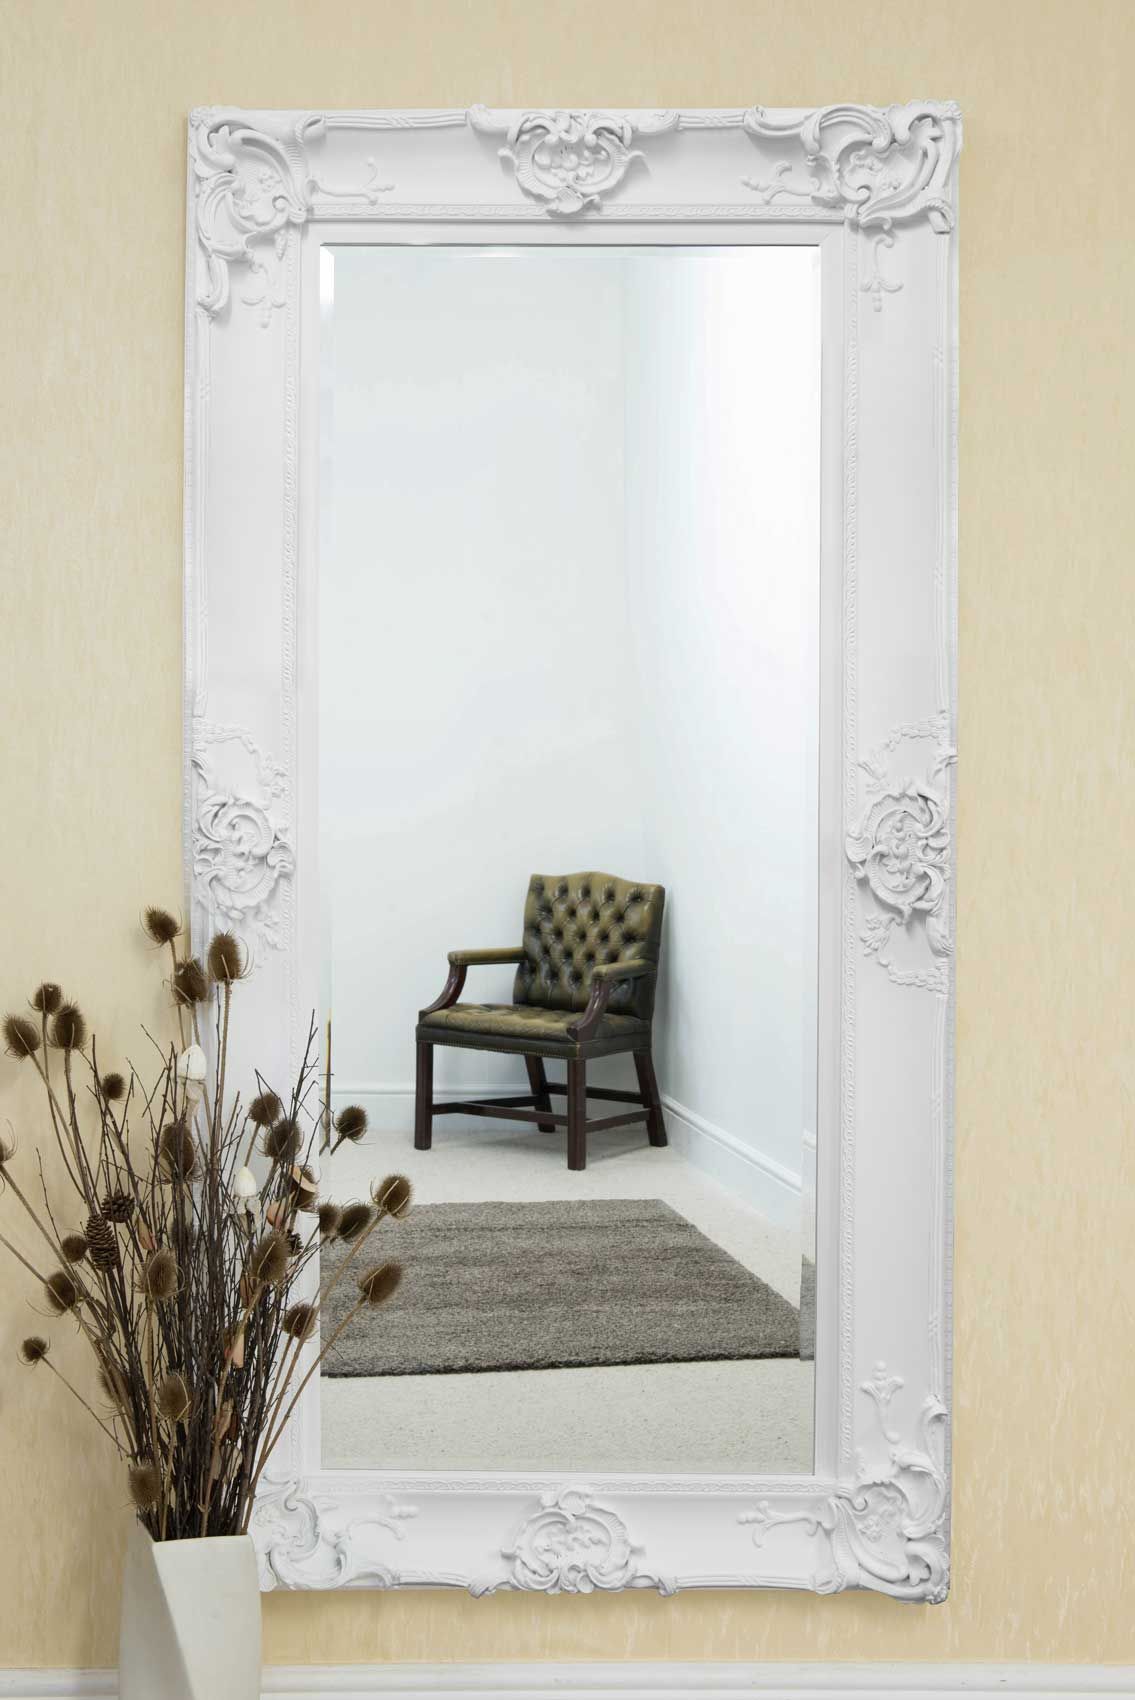 Beautiful Large White Decorative Ornate Wall Mirror 6ft X 3ft 183 X Throughout White Wall Mirrors (View 8 of 15)